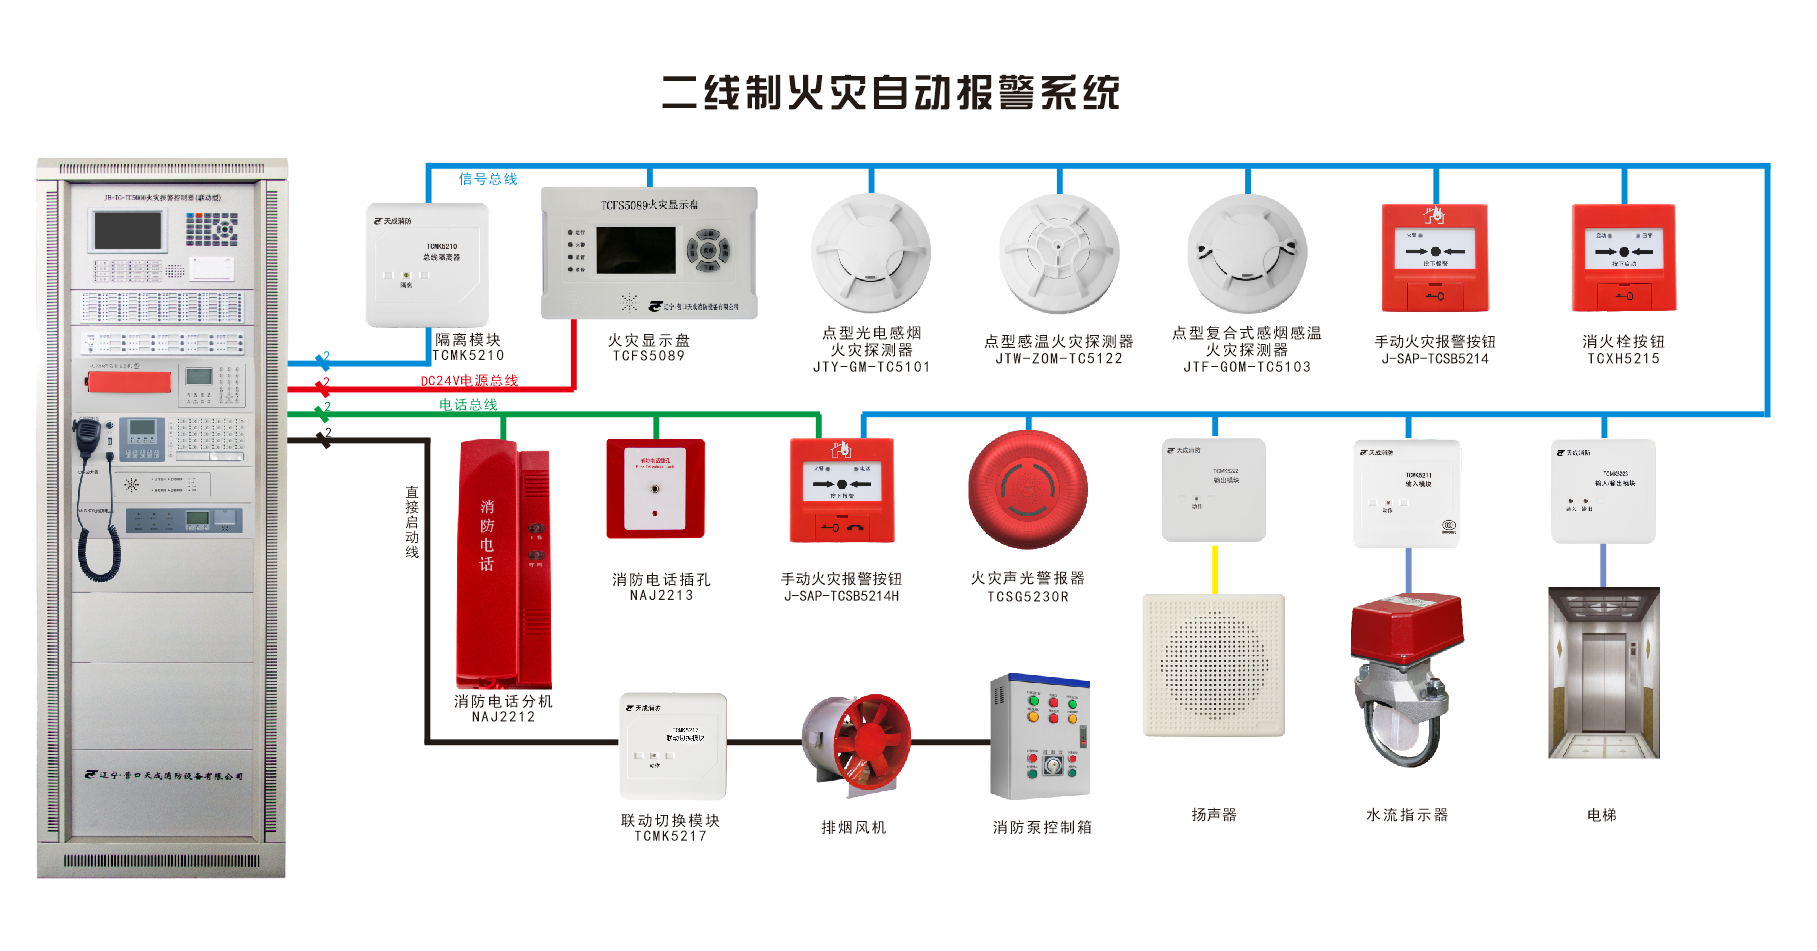 Fire automatic alarm system setting